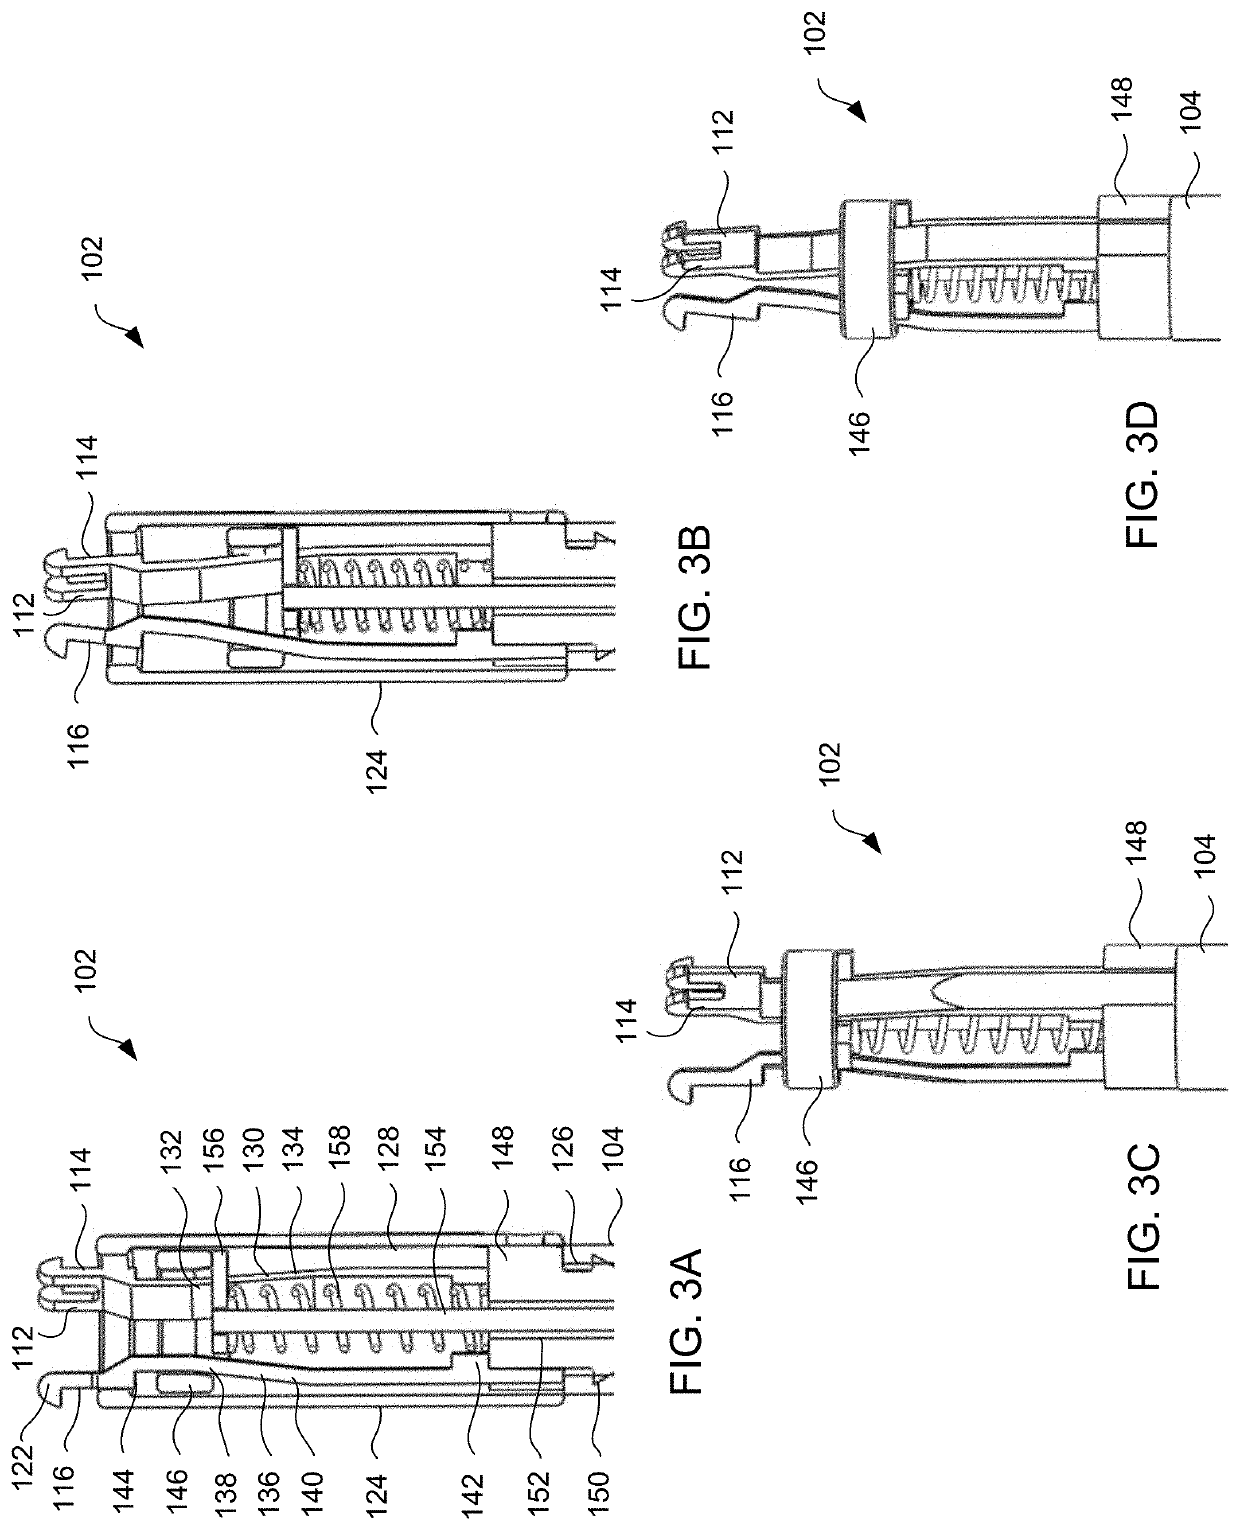 Systems and methods for delivering implantable devices across an atrial septum